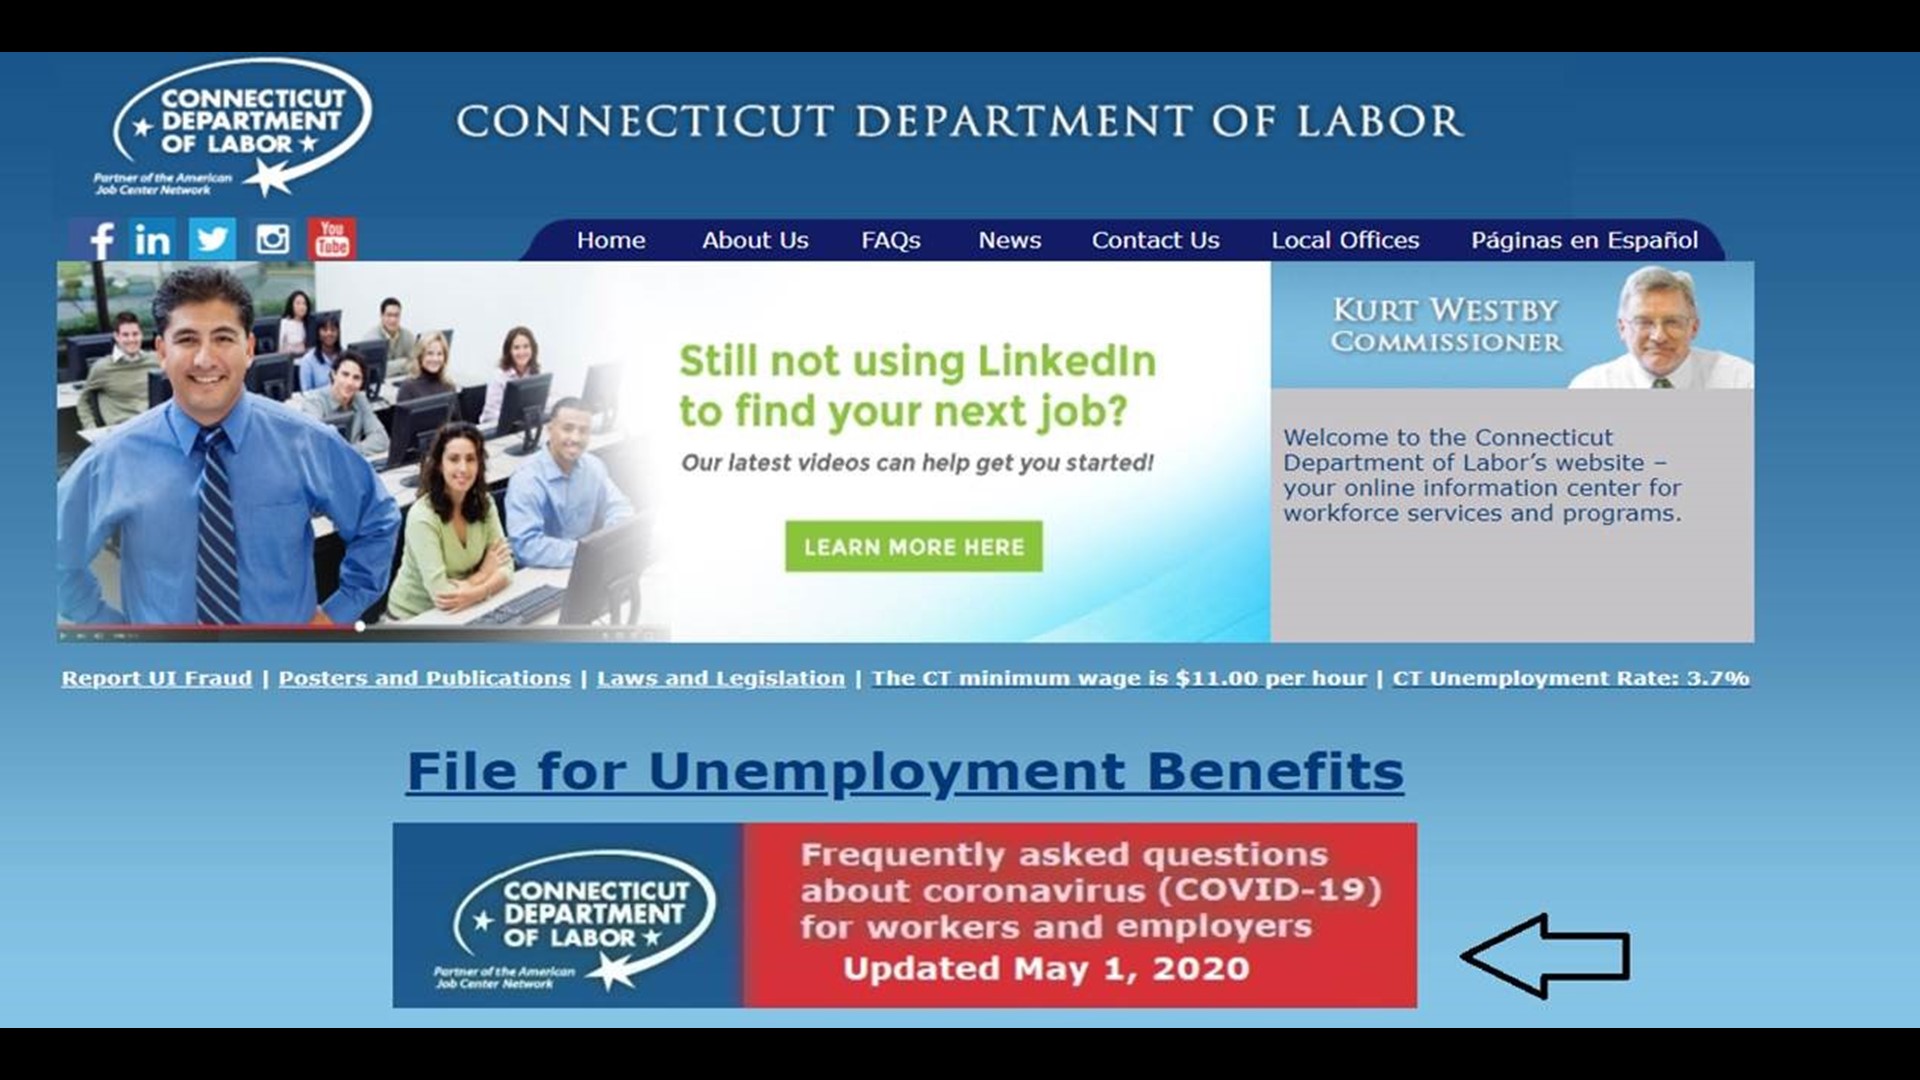 How to file for unemployment benefits in Connecticut